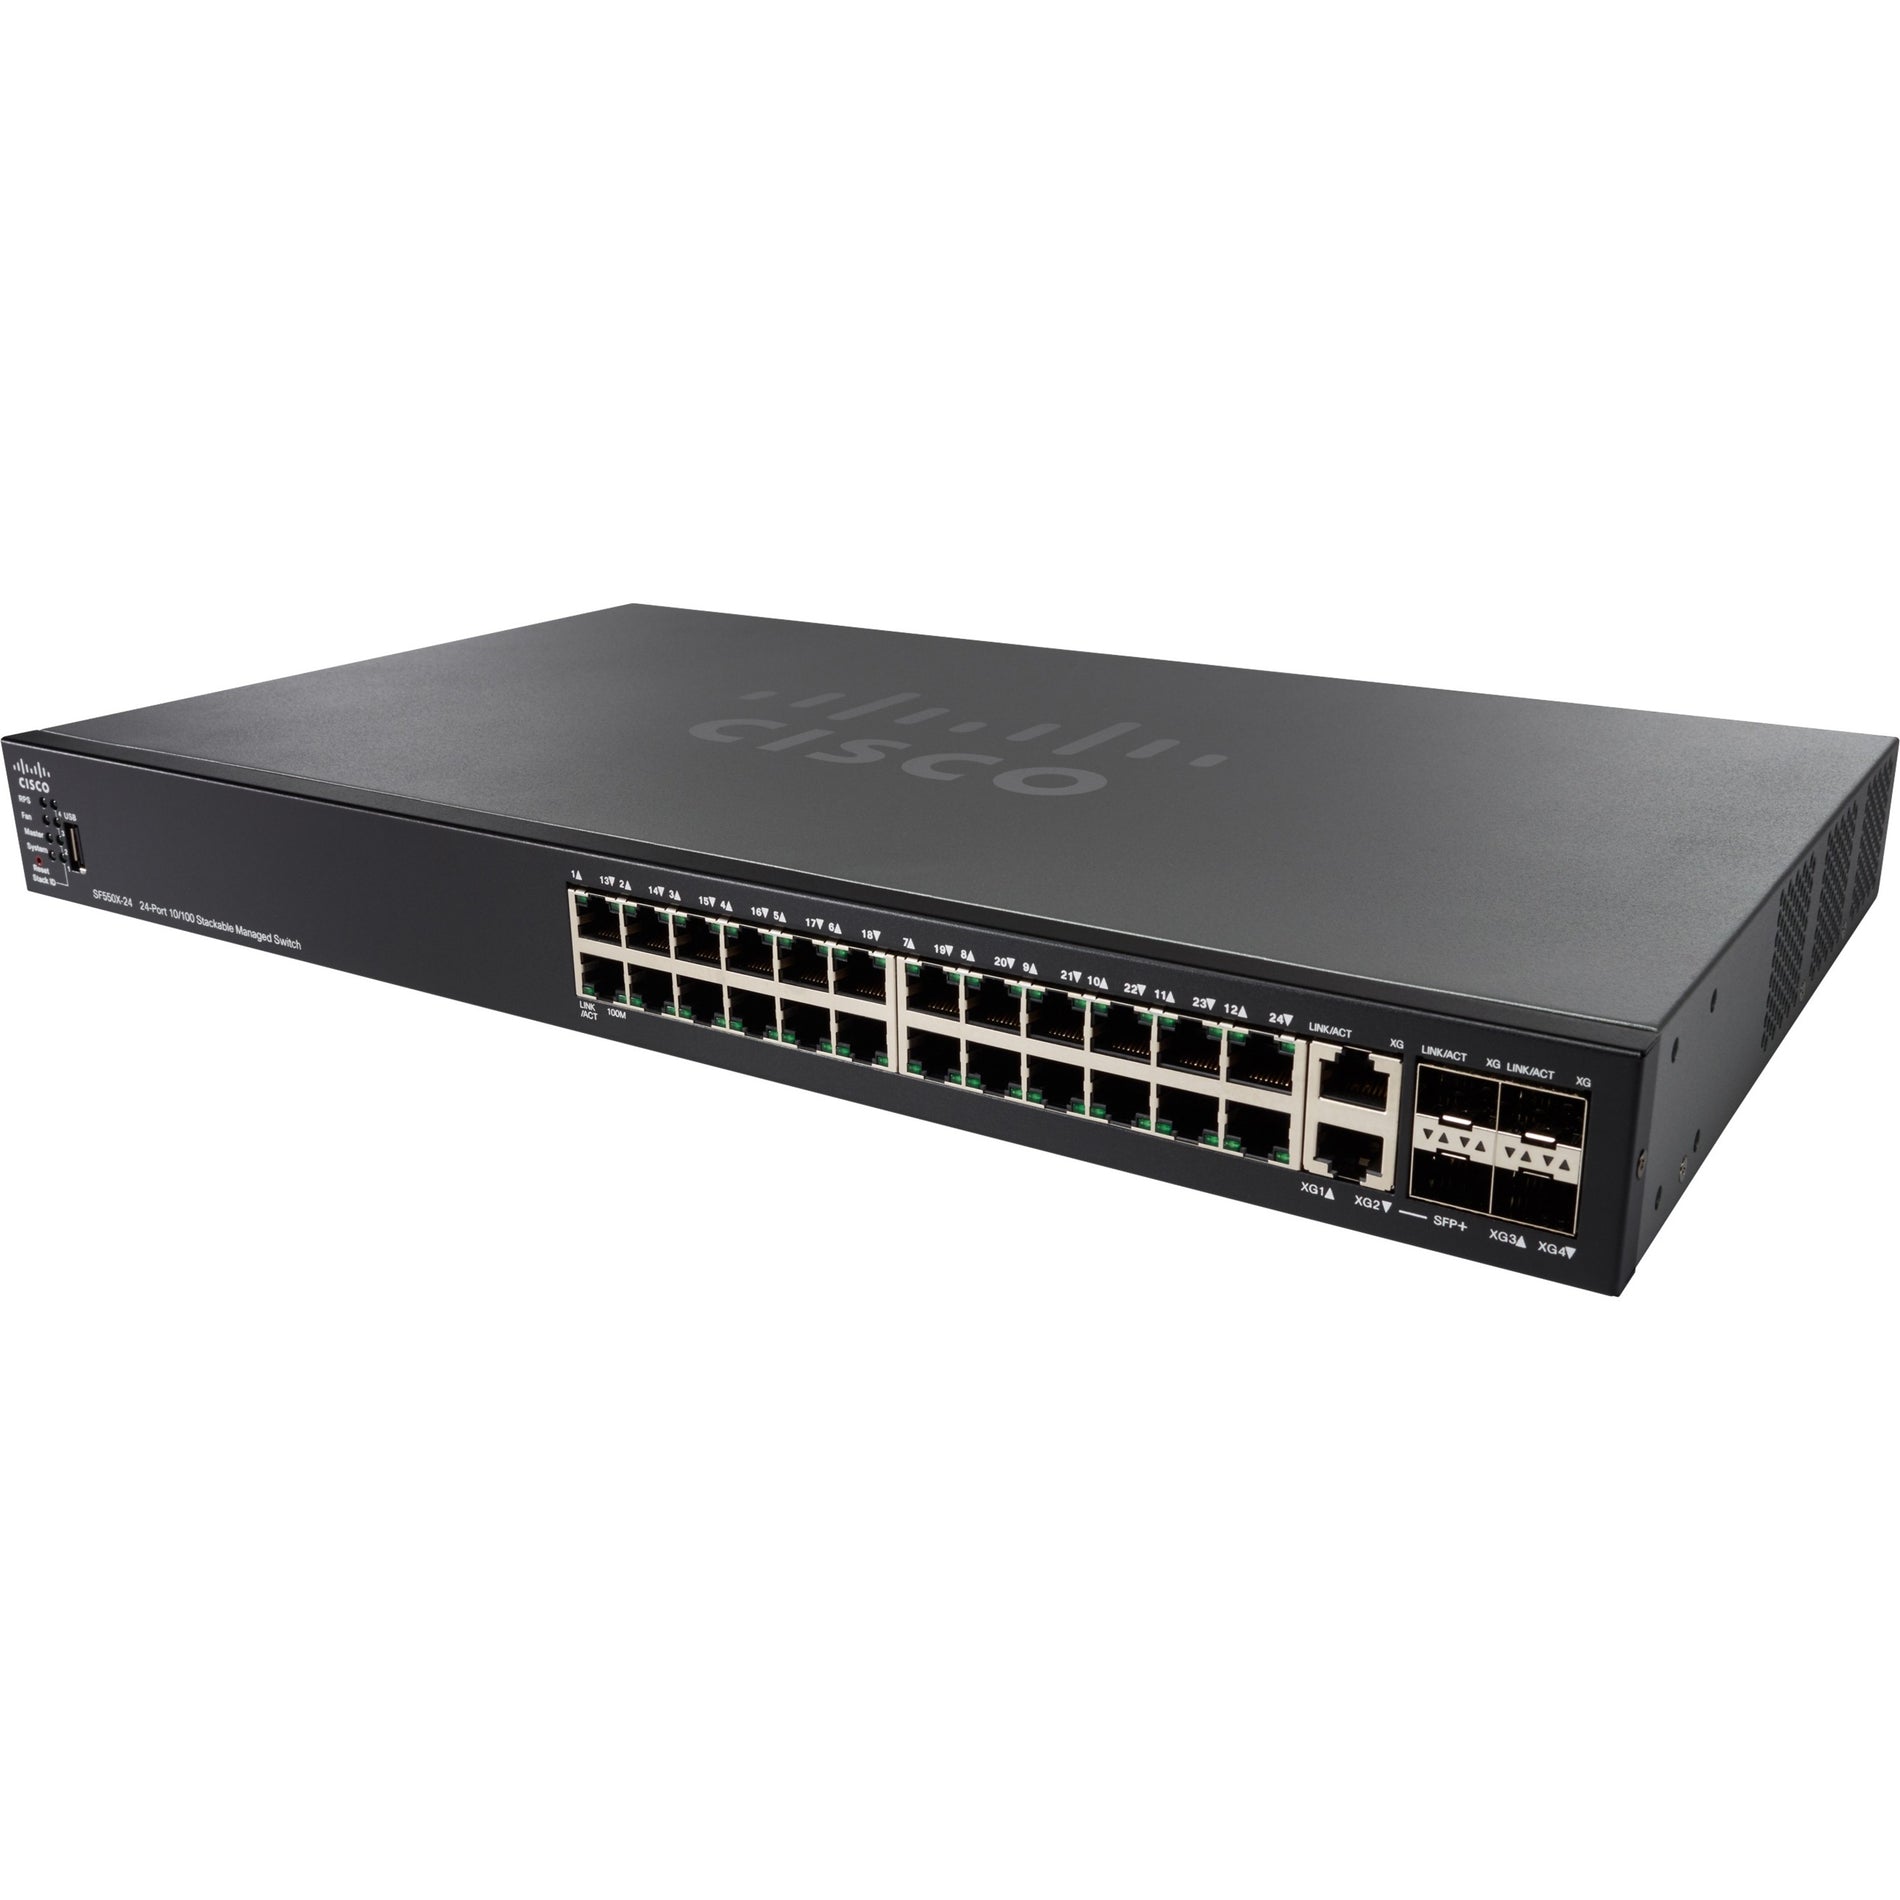 Cisco SF550X-24 24-port 10/100 Stackable Switch (SF550X-24-K9-NA)